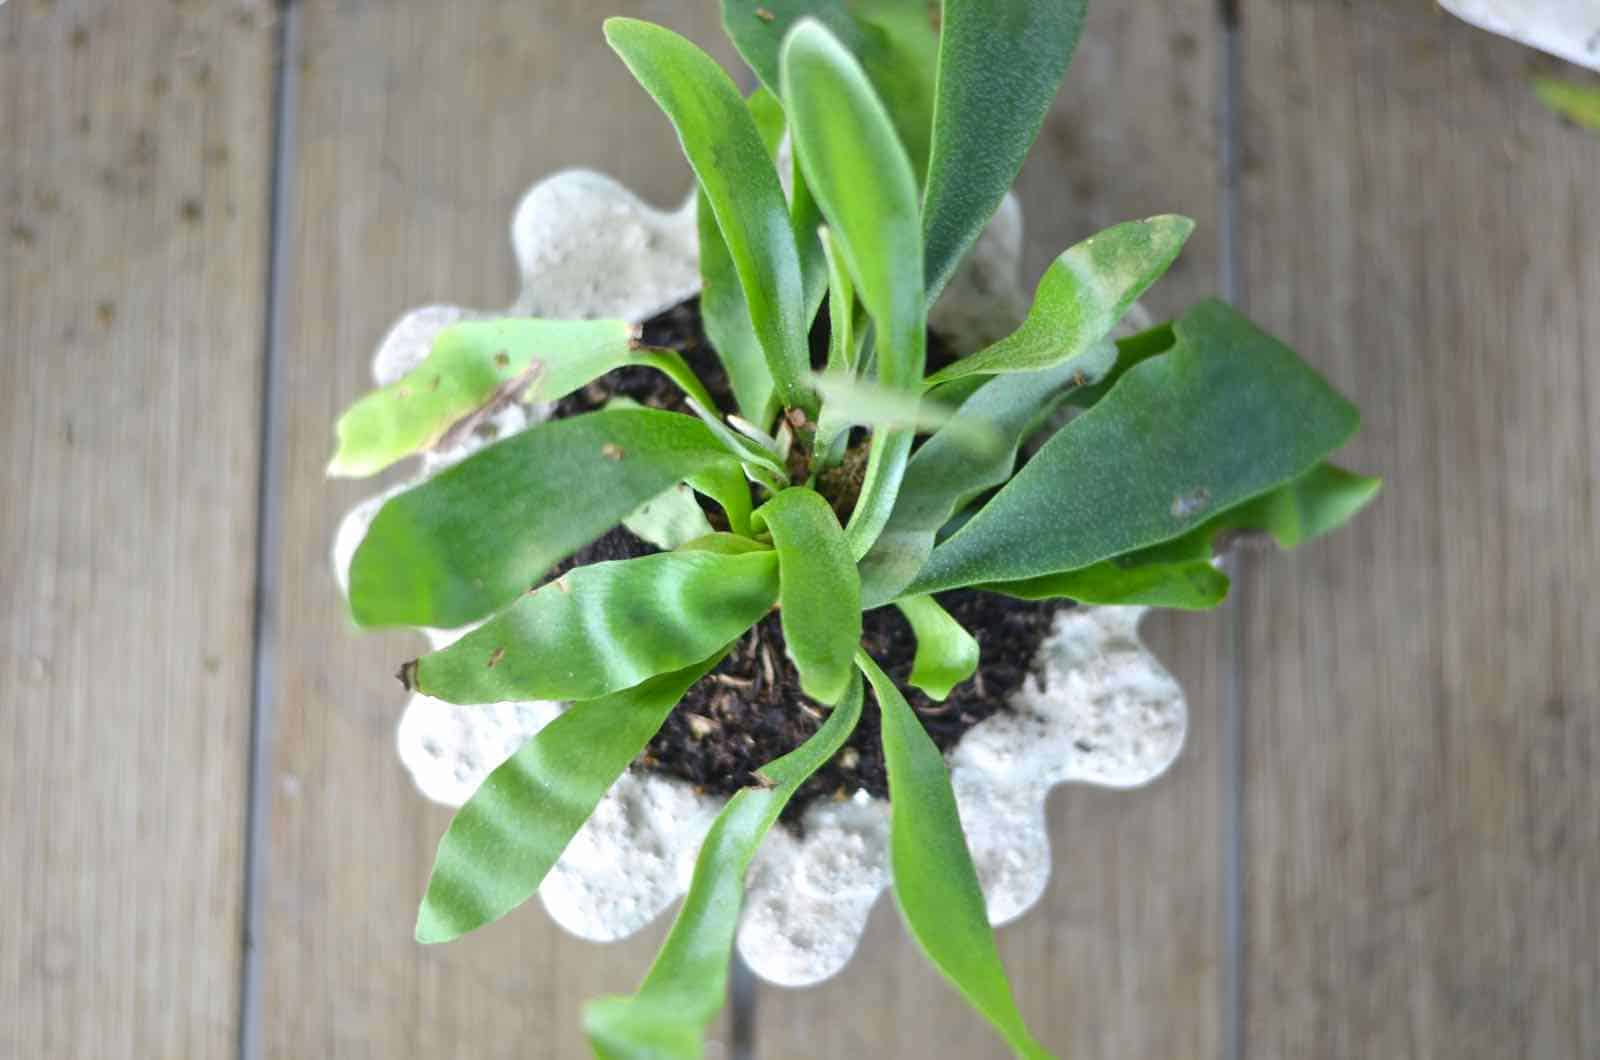 Make these amazing DIY concrete planters in under an hour for $5.